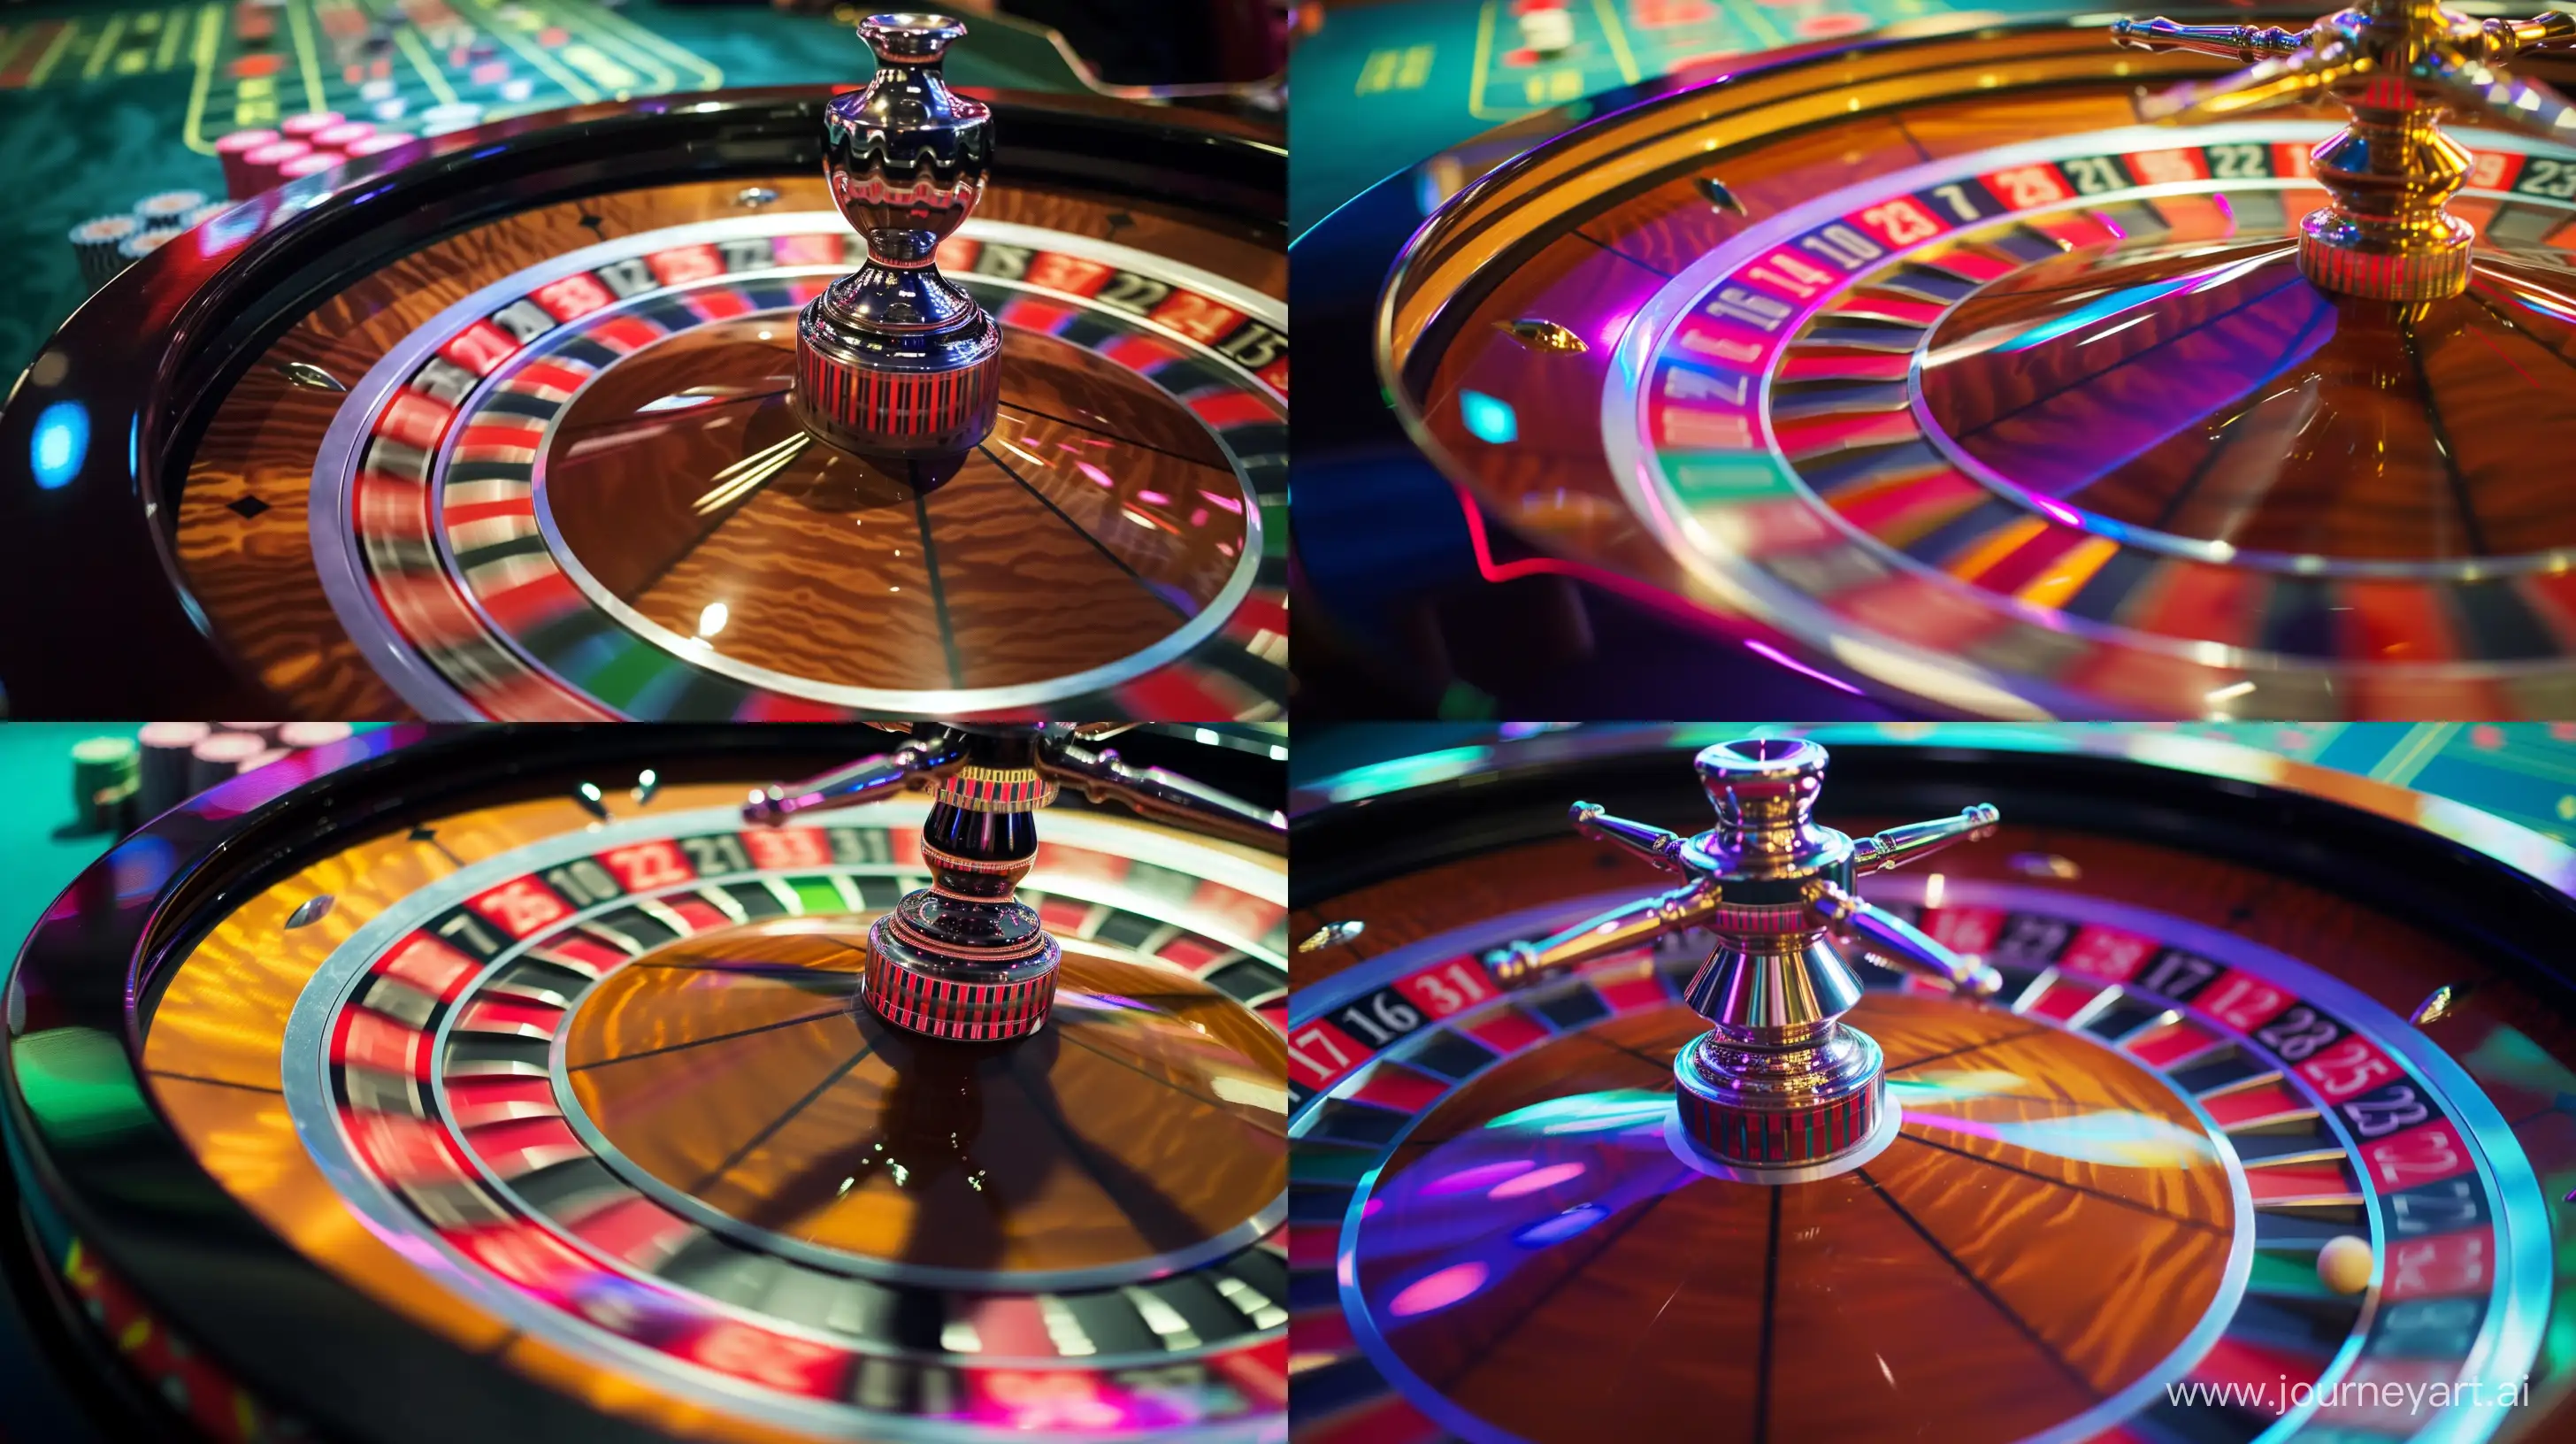 Vibrant-Roulette-Wheel-Spin-with-MidAir-Ball-Excitement